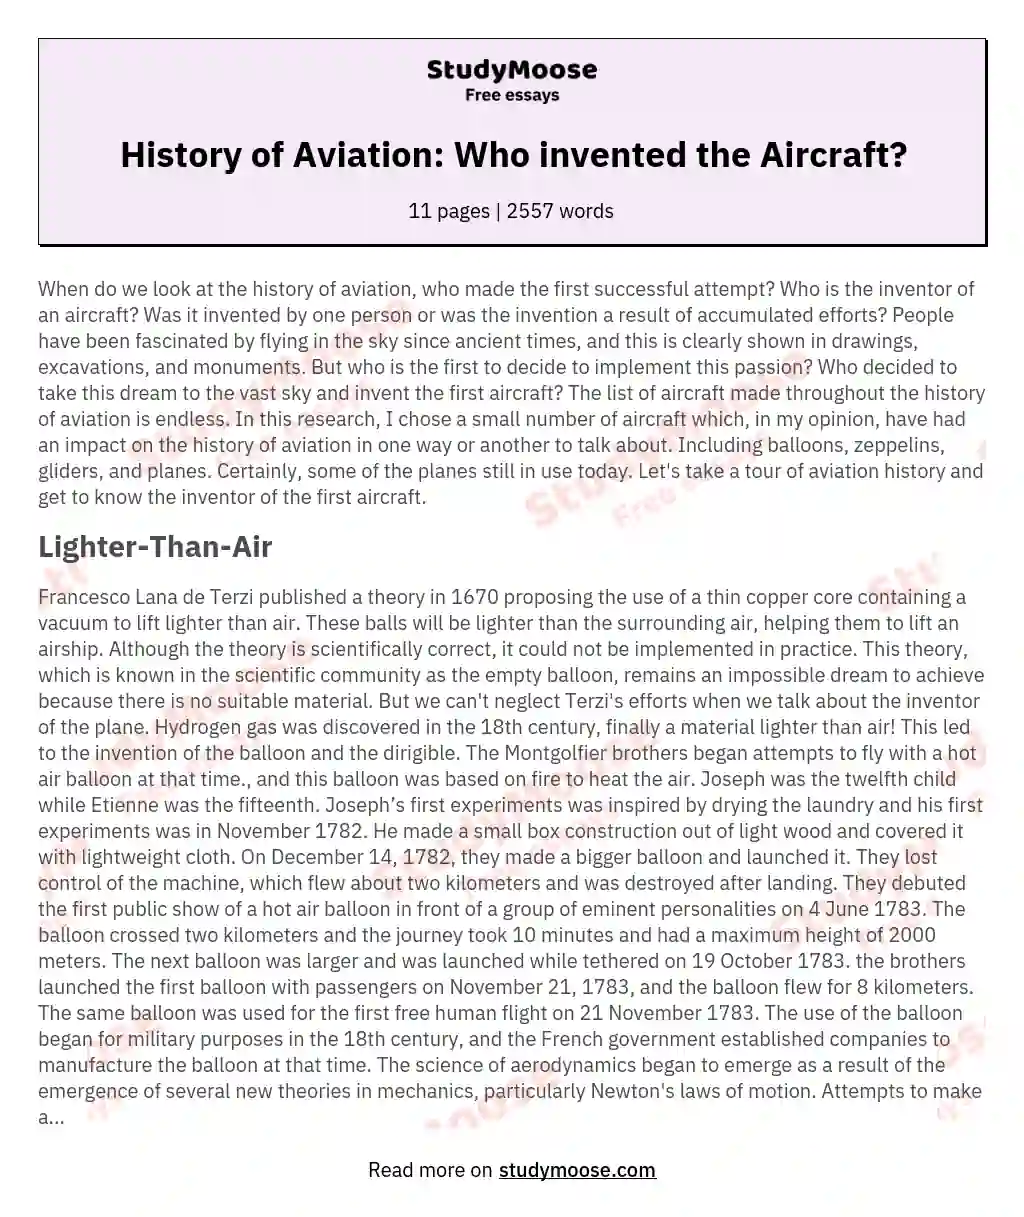 History of Aviation: Who invented the Aircraft?